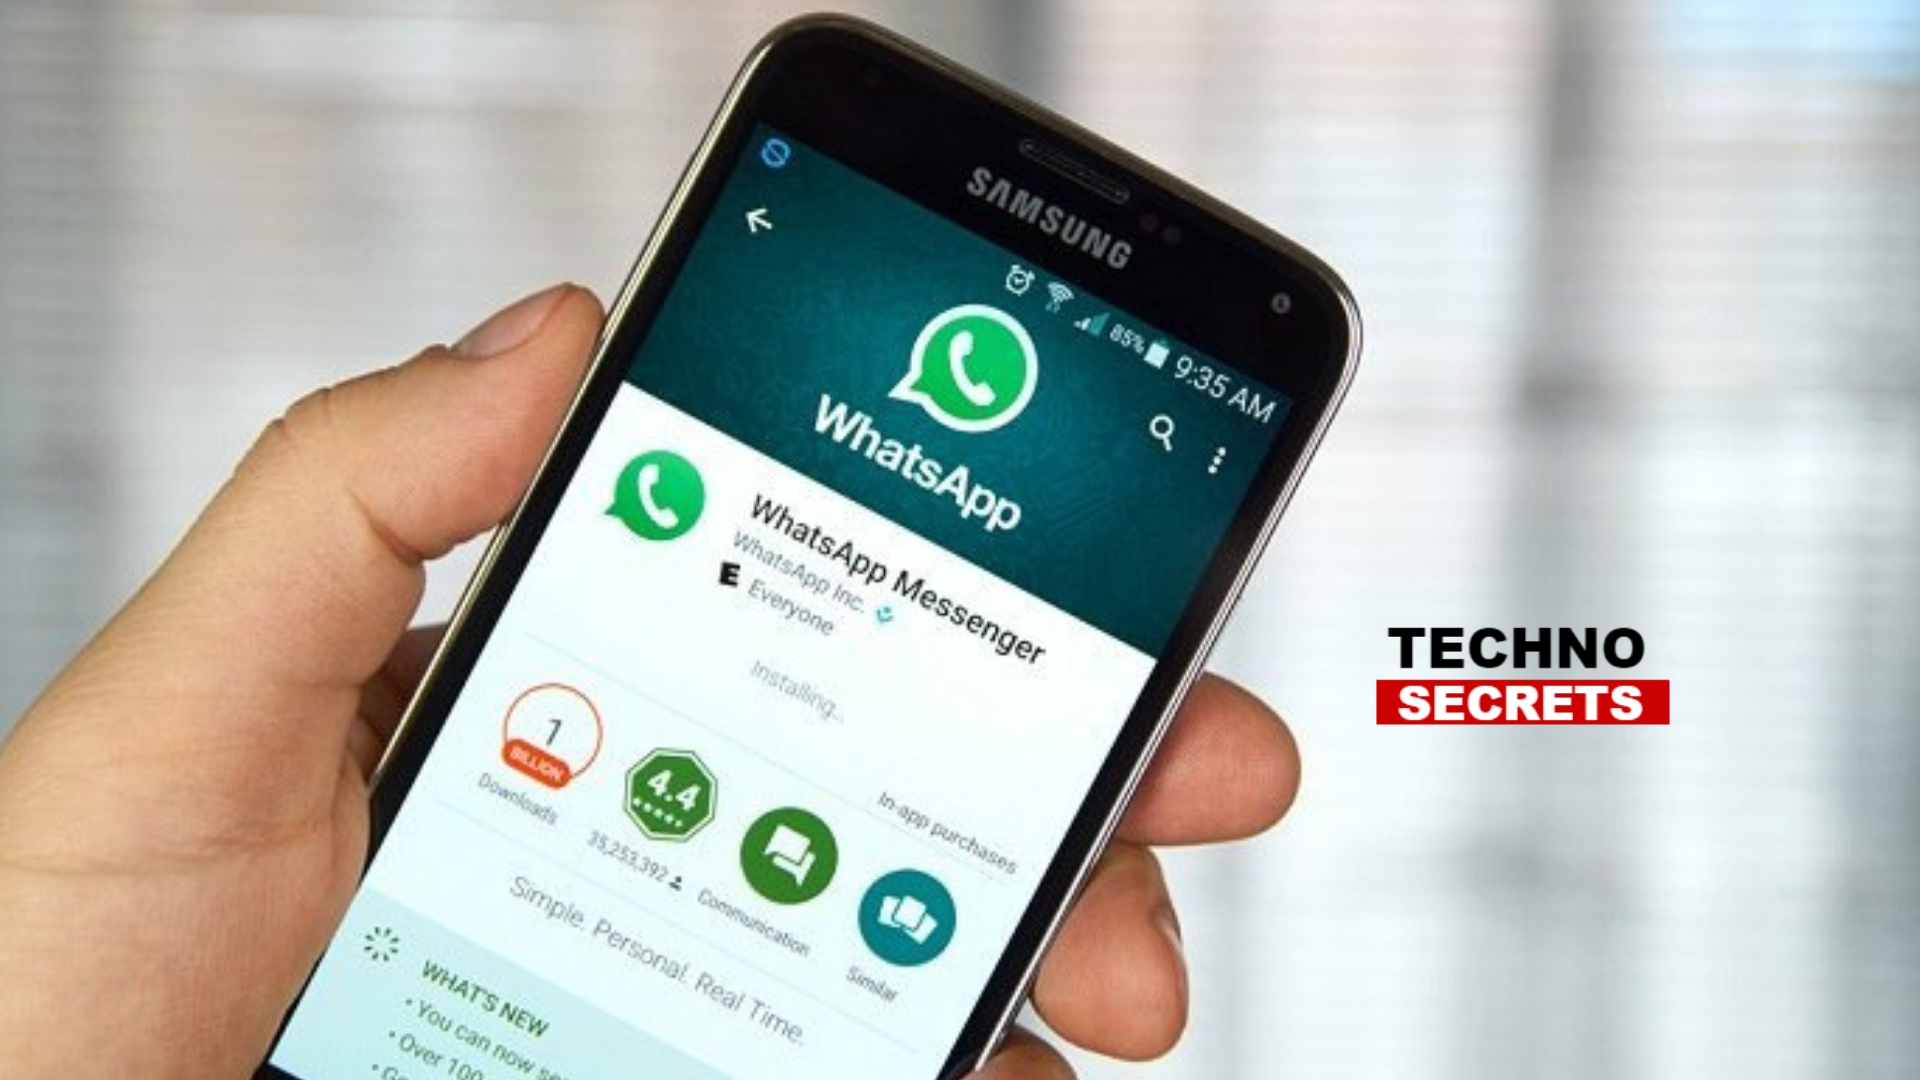 Whatsapp Will Launch feature Like Dark Theme, Voice Message And Much More In New Year